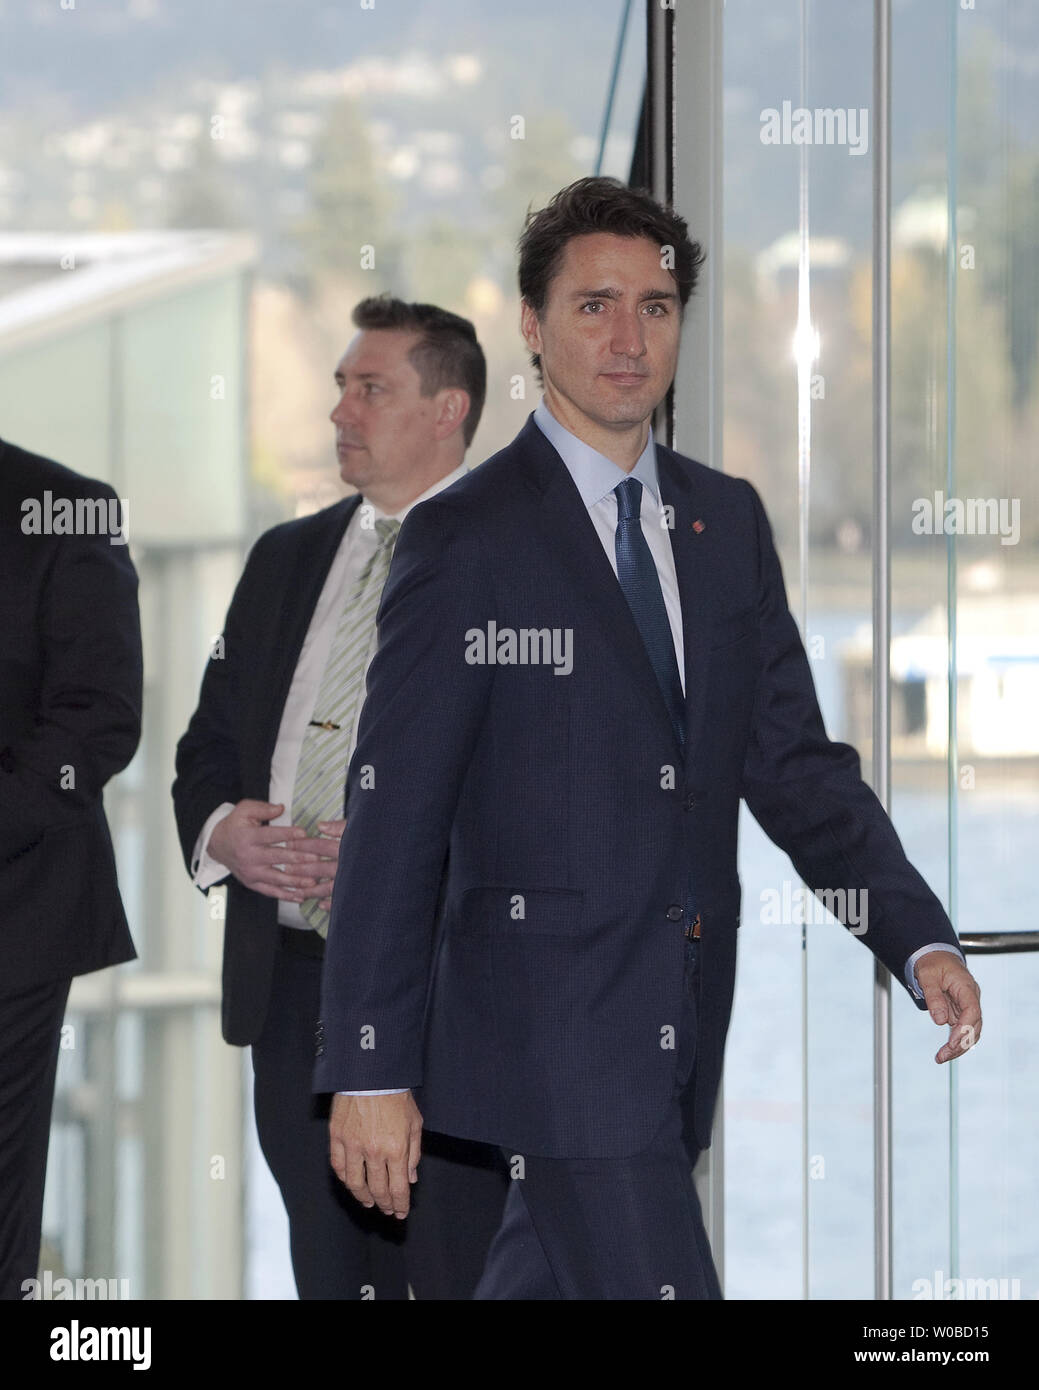 Canada's Prime Minister Justin Trudeau arrives at the Opening Plenary during the 2017 UN Peacekeeping Defence Ministerial in Vancouver, British Columbia, November 15, 2017. UPI/Heinz Ruckemann Stock Photo